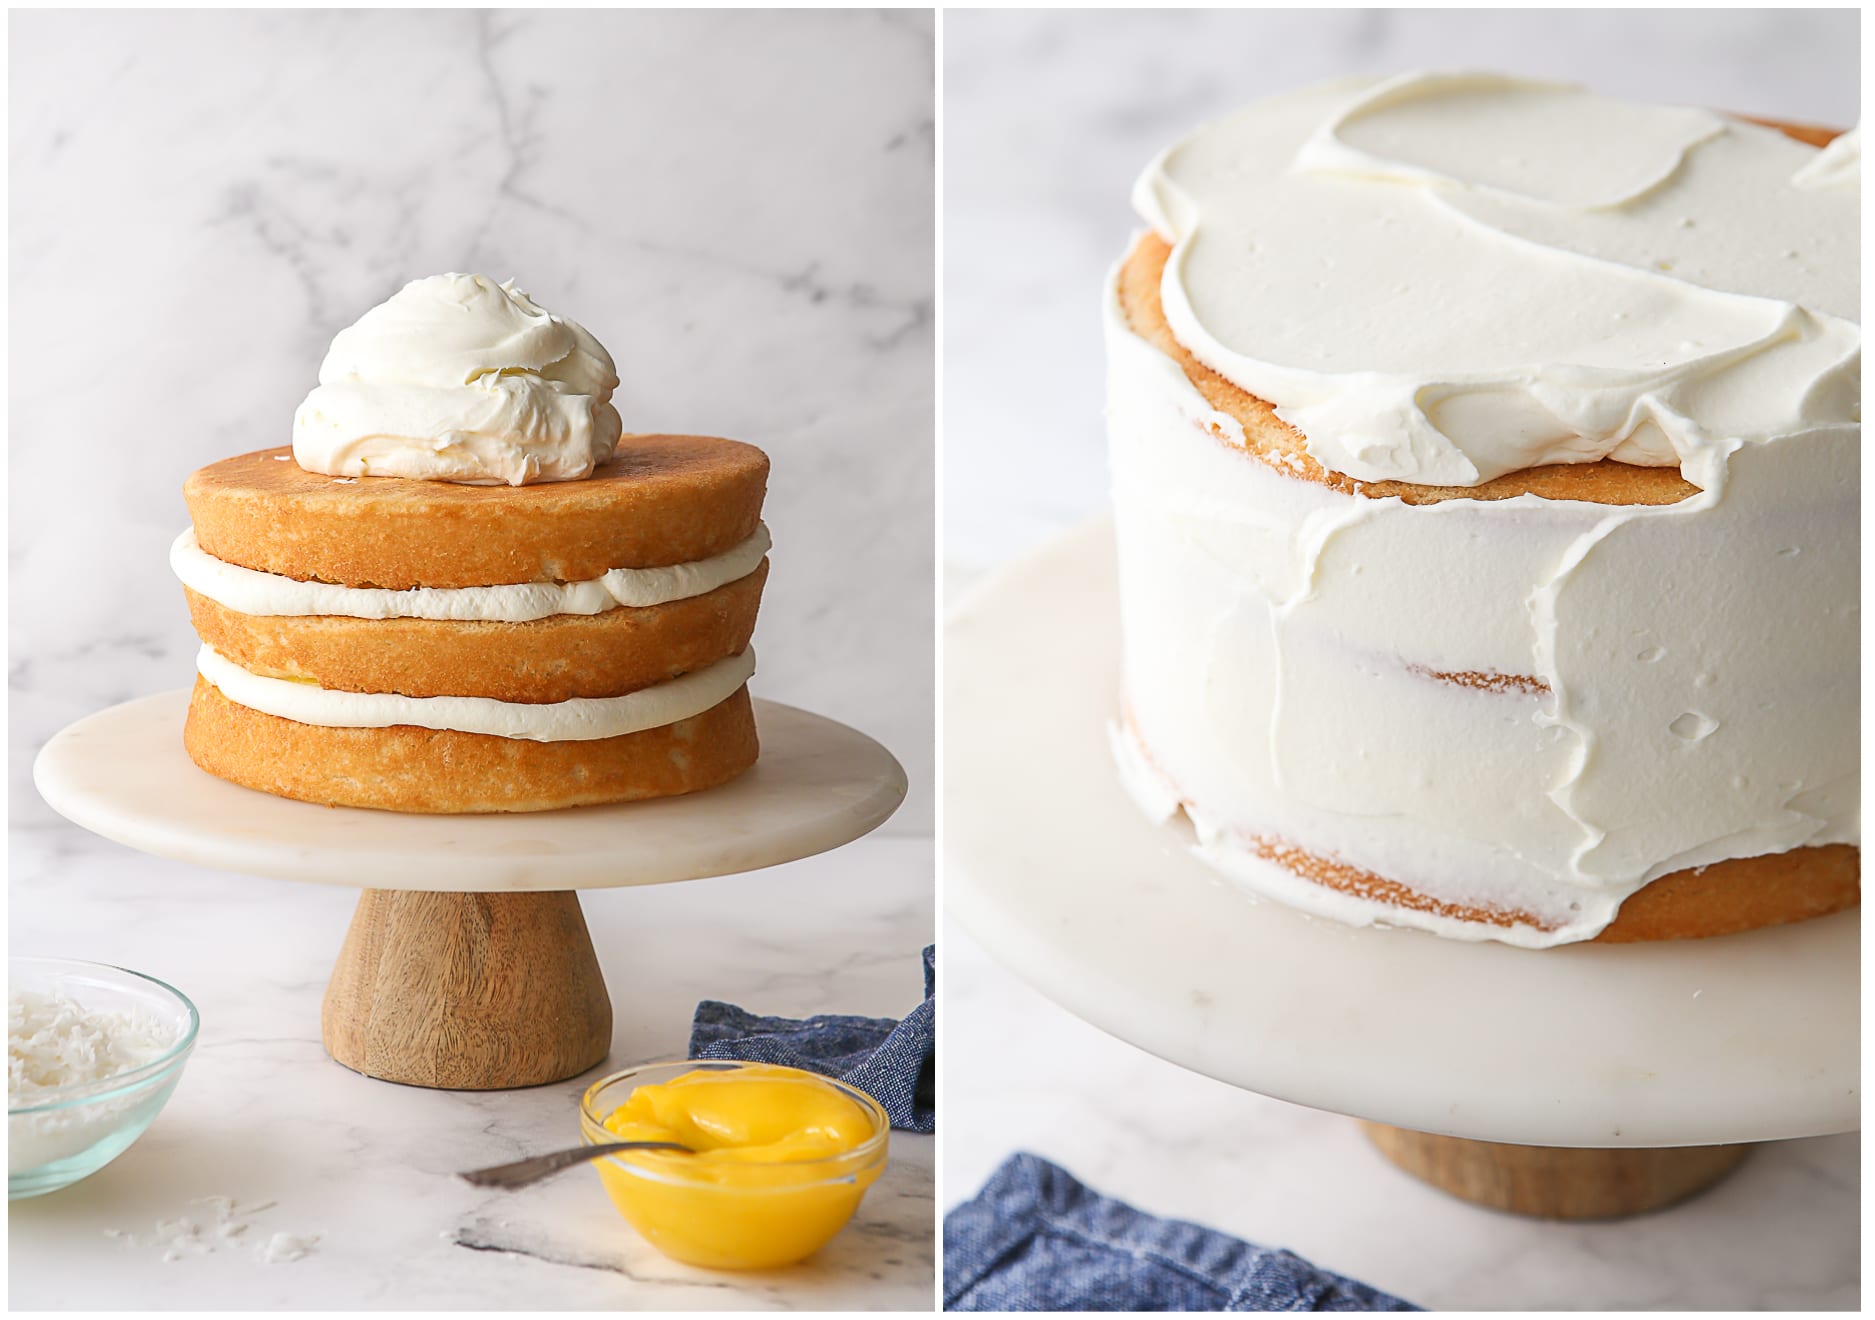 assembling the lemon coconut cake on a cake stand, and frosting it